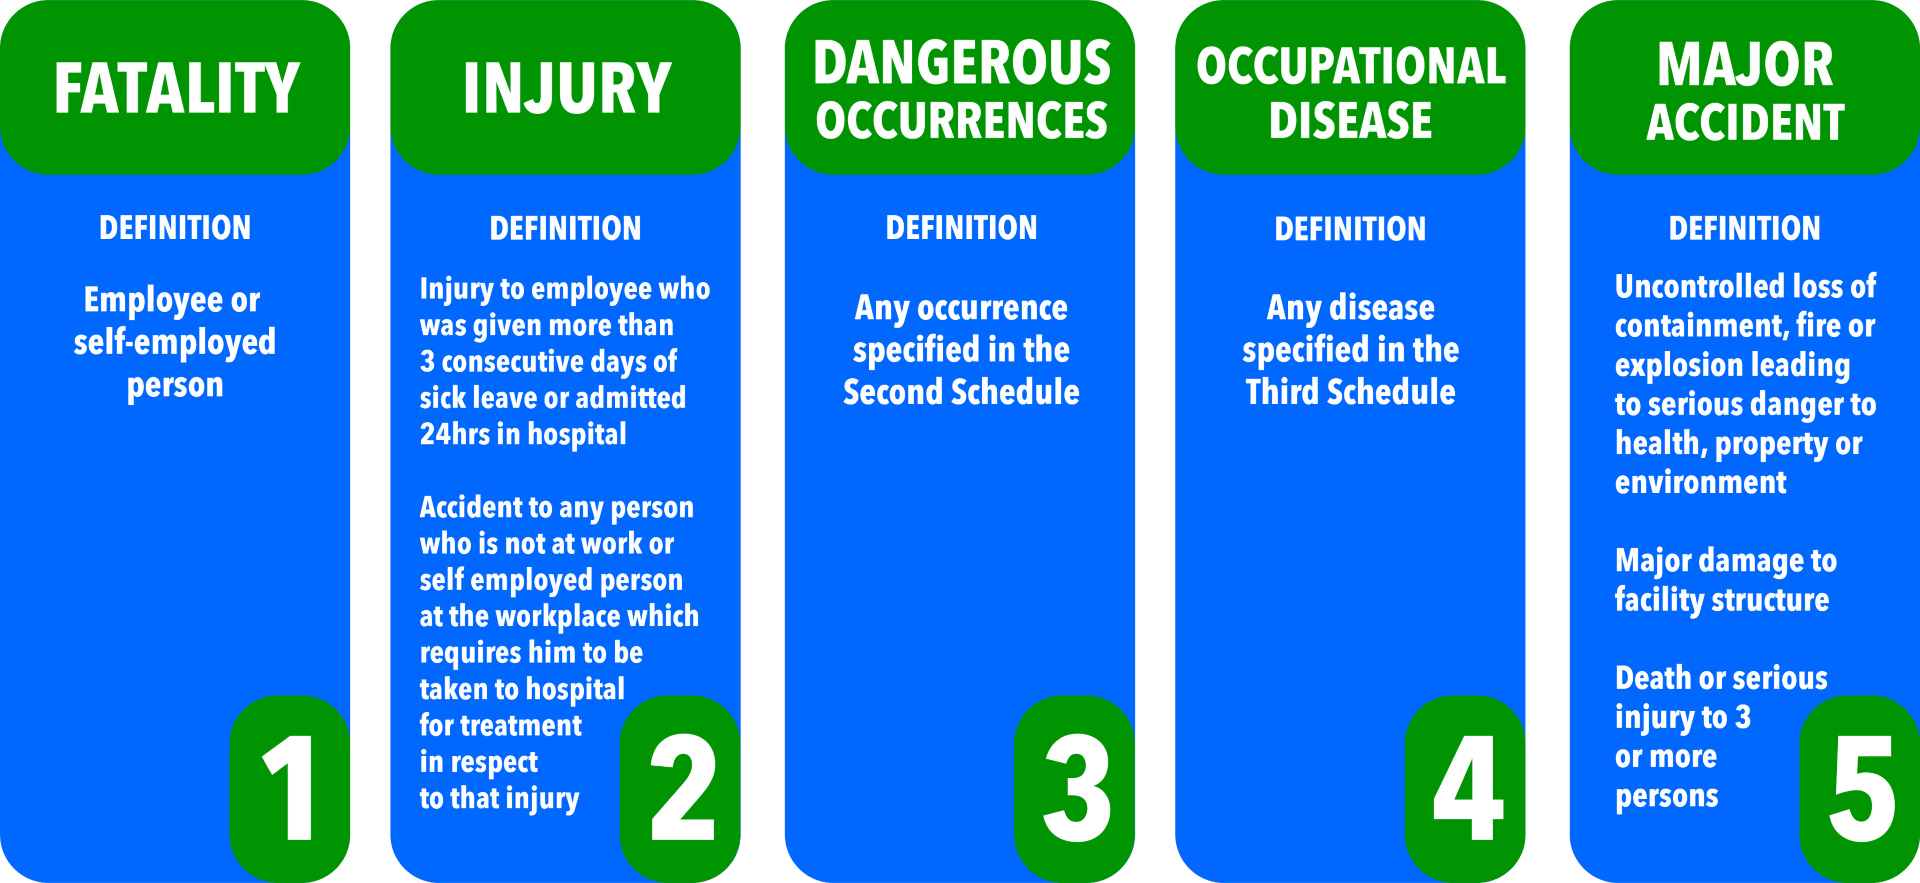 5 types of reportable incidents: 1) fatality, 2) injury, 3) dangerous occurences, 4) occupational disease, and 5) major accident.